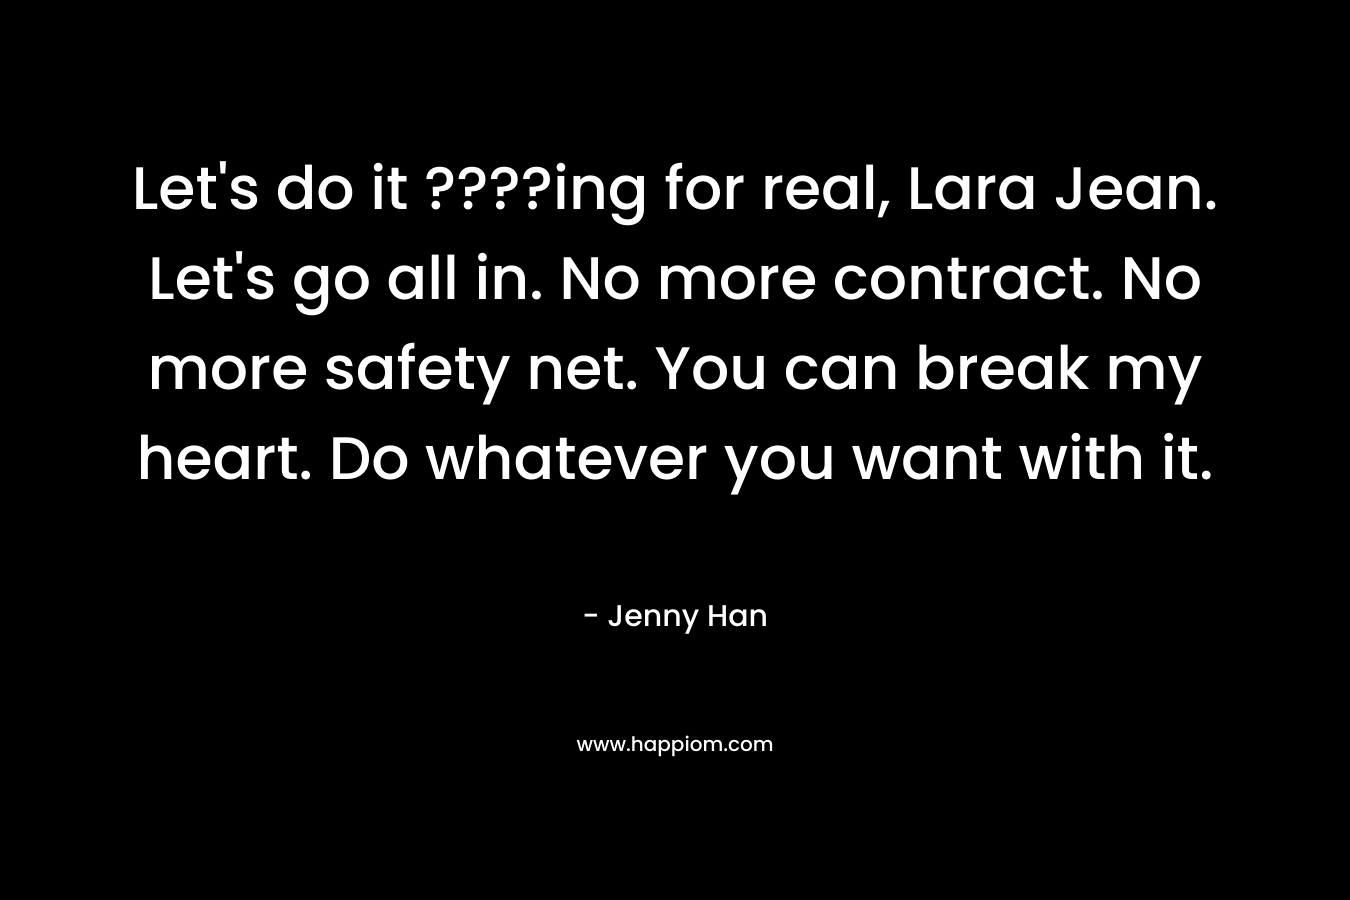 Let’s do it ????ing for real, Lara Jean. Let’s go all in. No more contract. No more safety net. You can break my heart. Do whatever you want with it. – Jenny Han